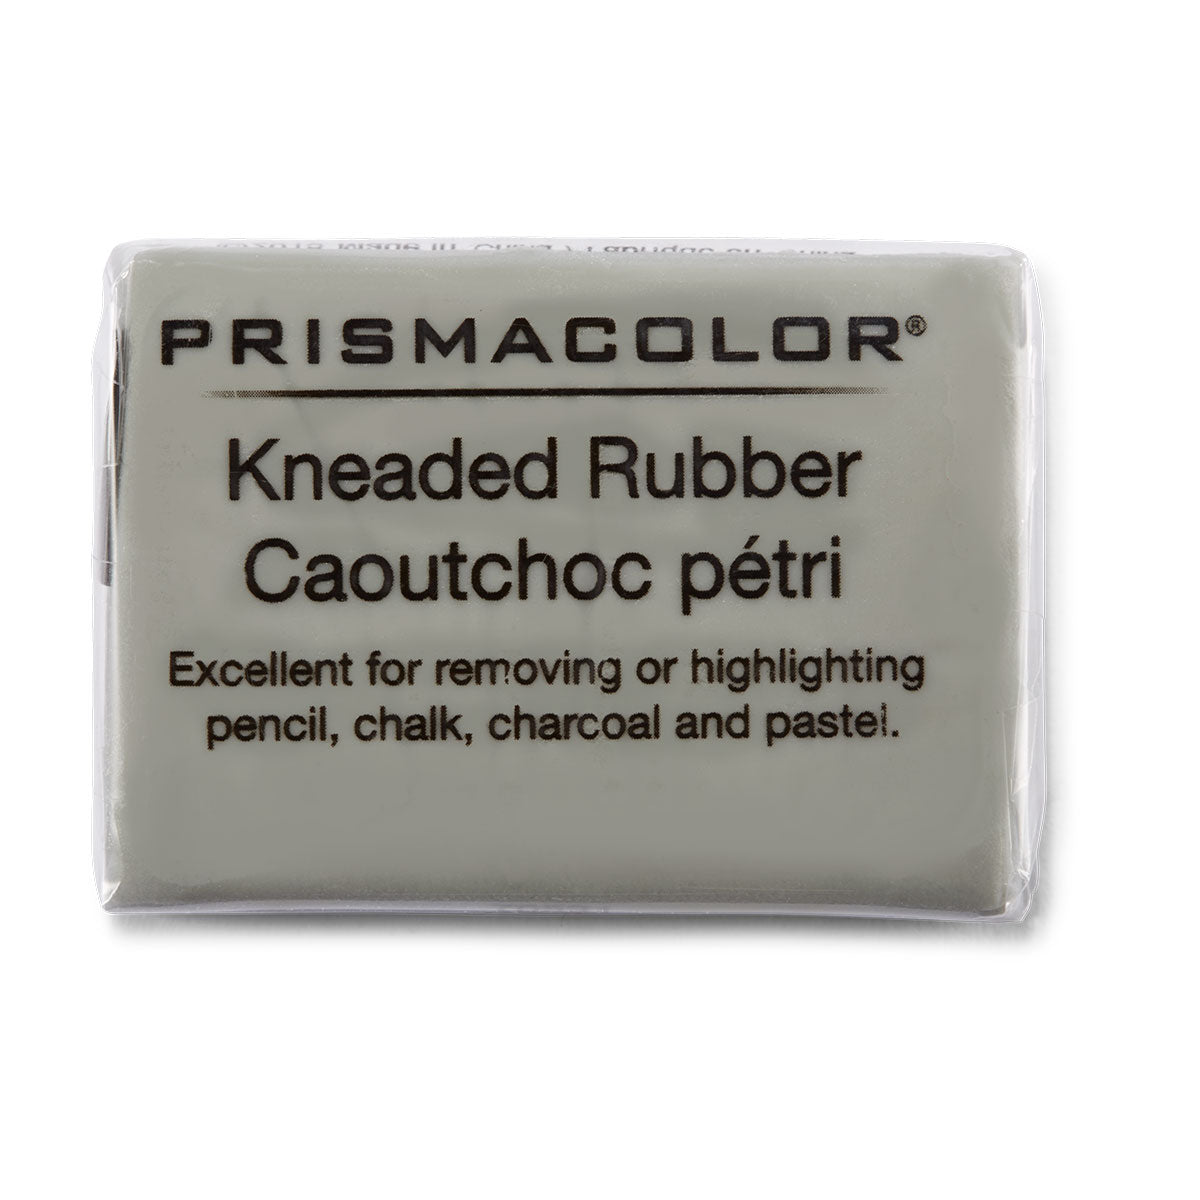 Prismacolor Scholar Kneaded Rubber For Removing or Highlighting , Pencil, Chalk, Charcoal, and Pastel  Prismacolor Erasers